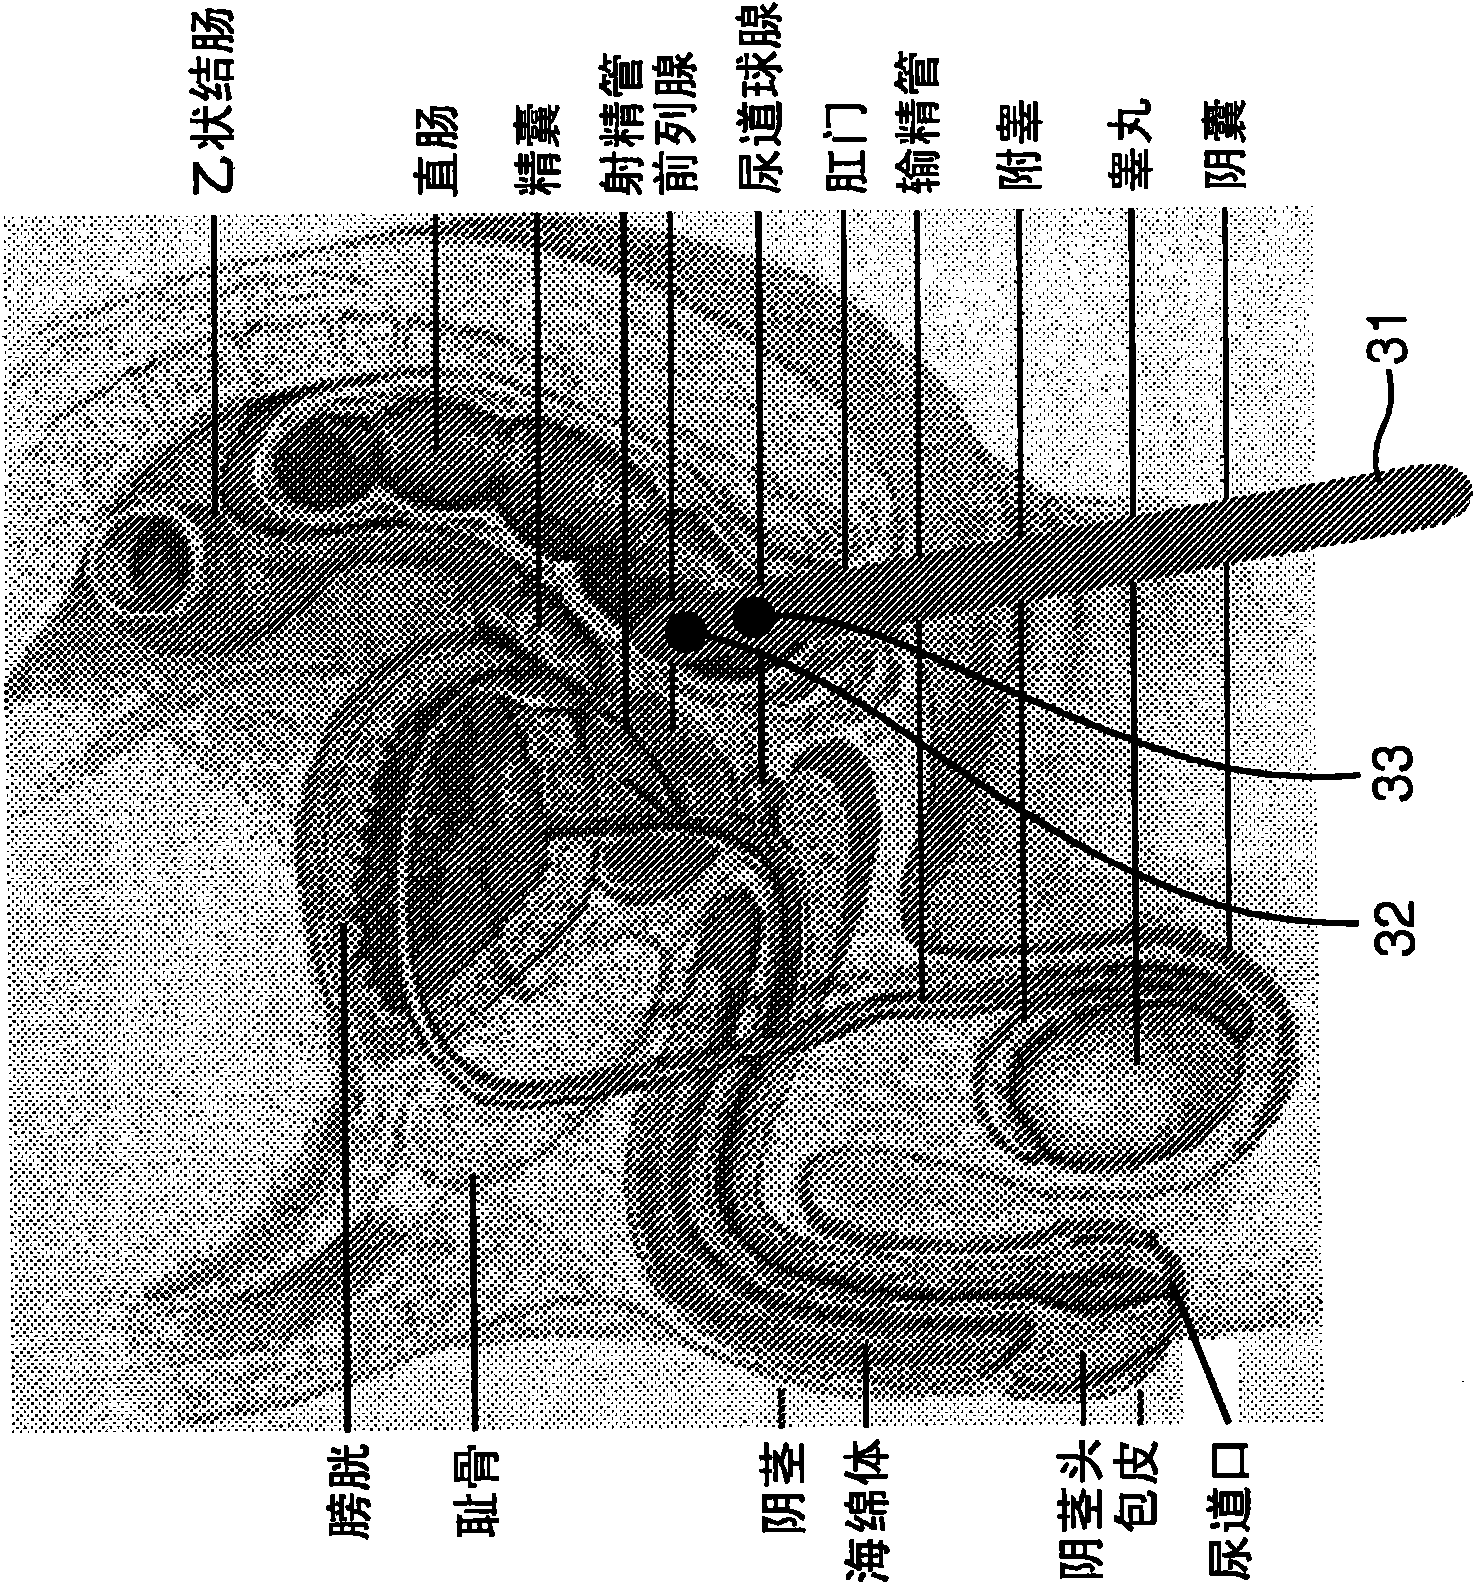 A system, device, method, computer-readable medium, and use for in vivo imaging of tissue in an anatomical structure